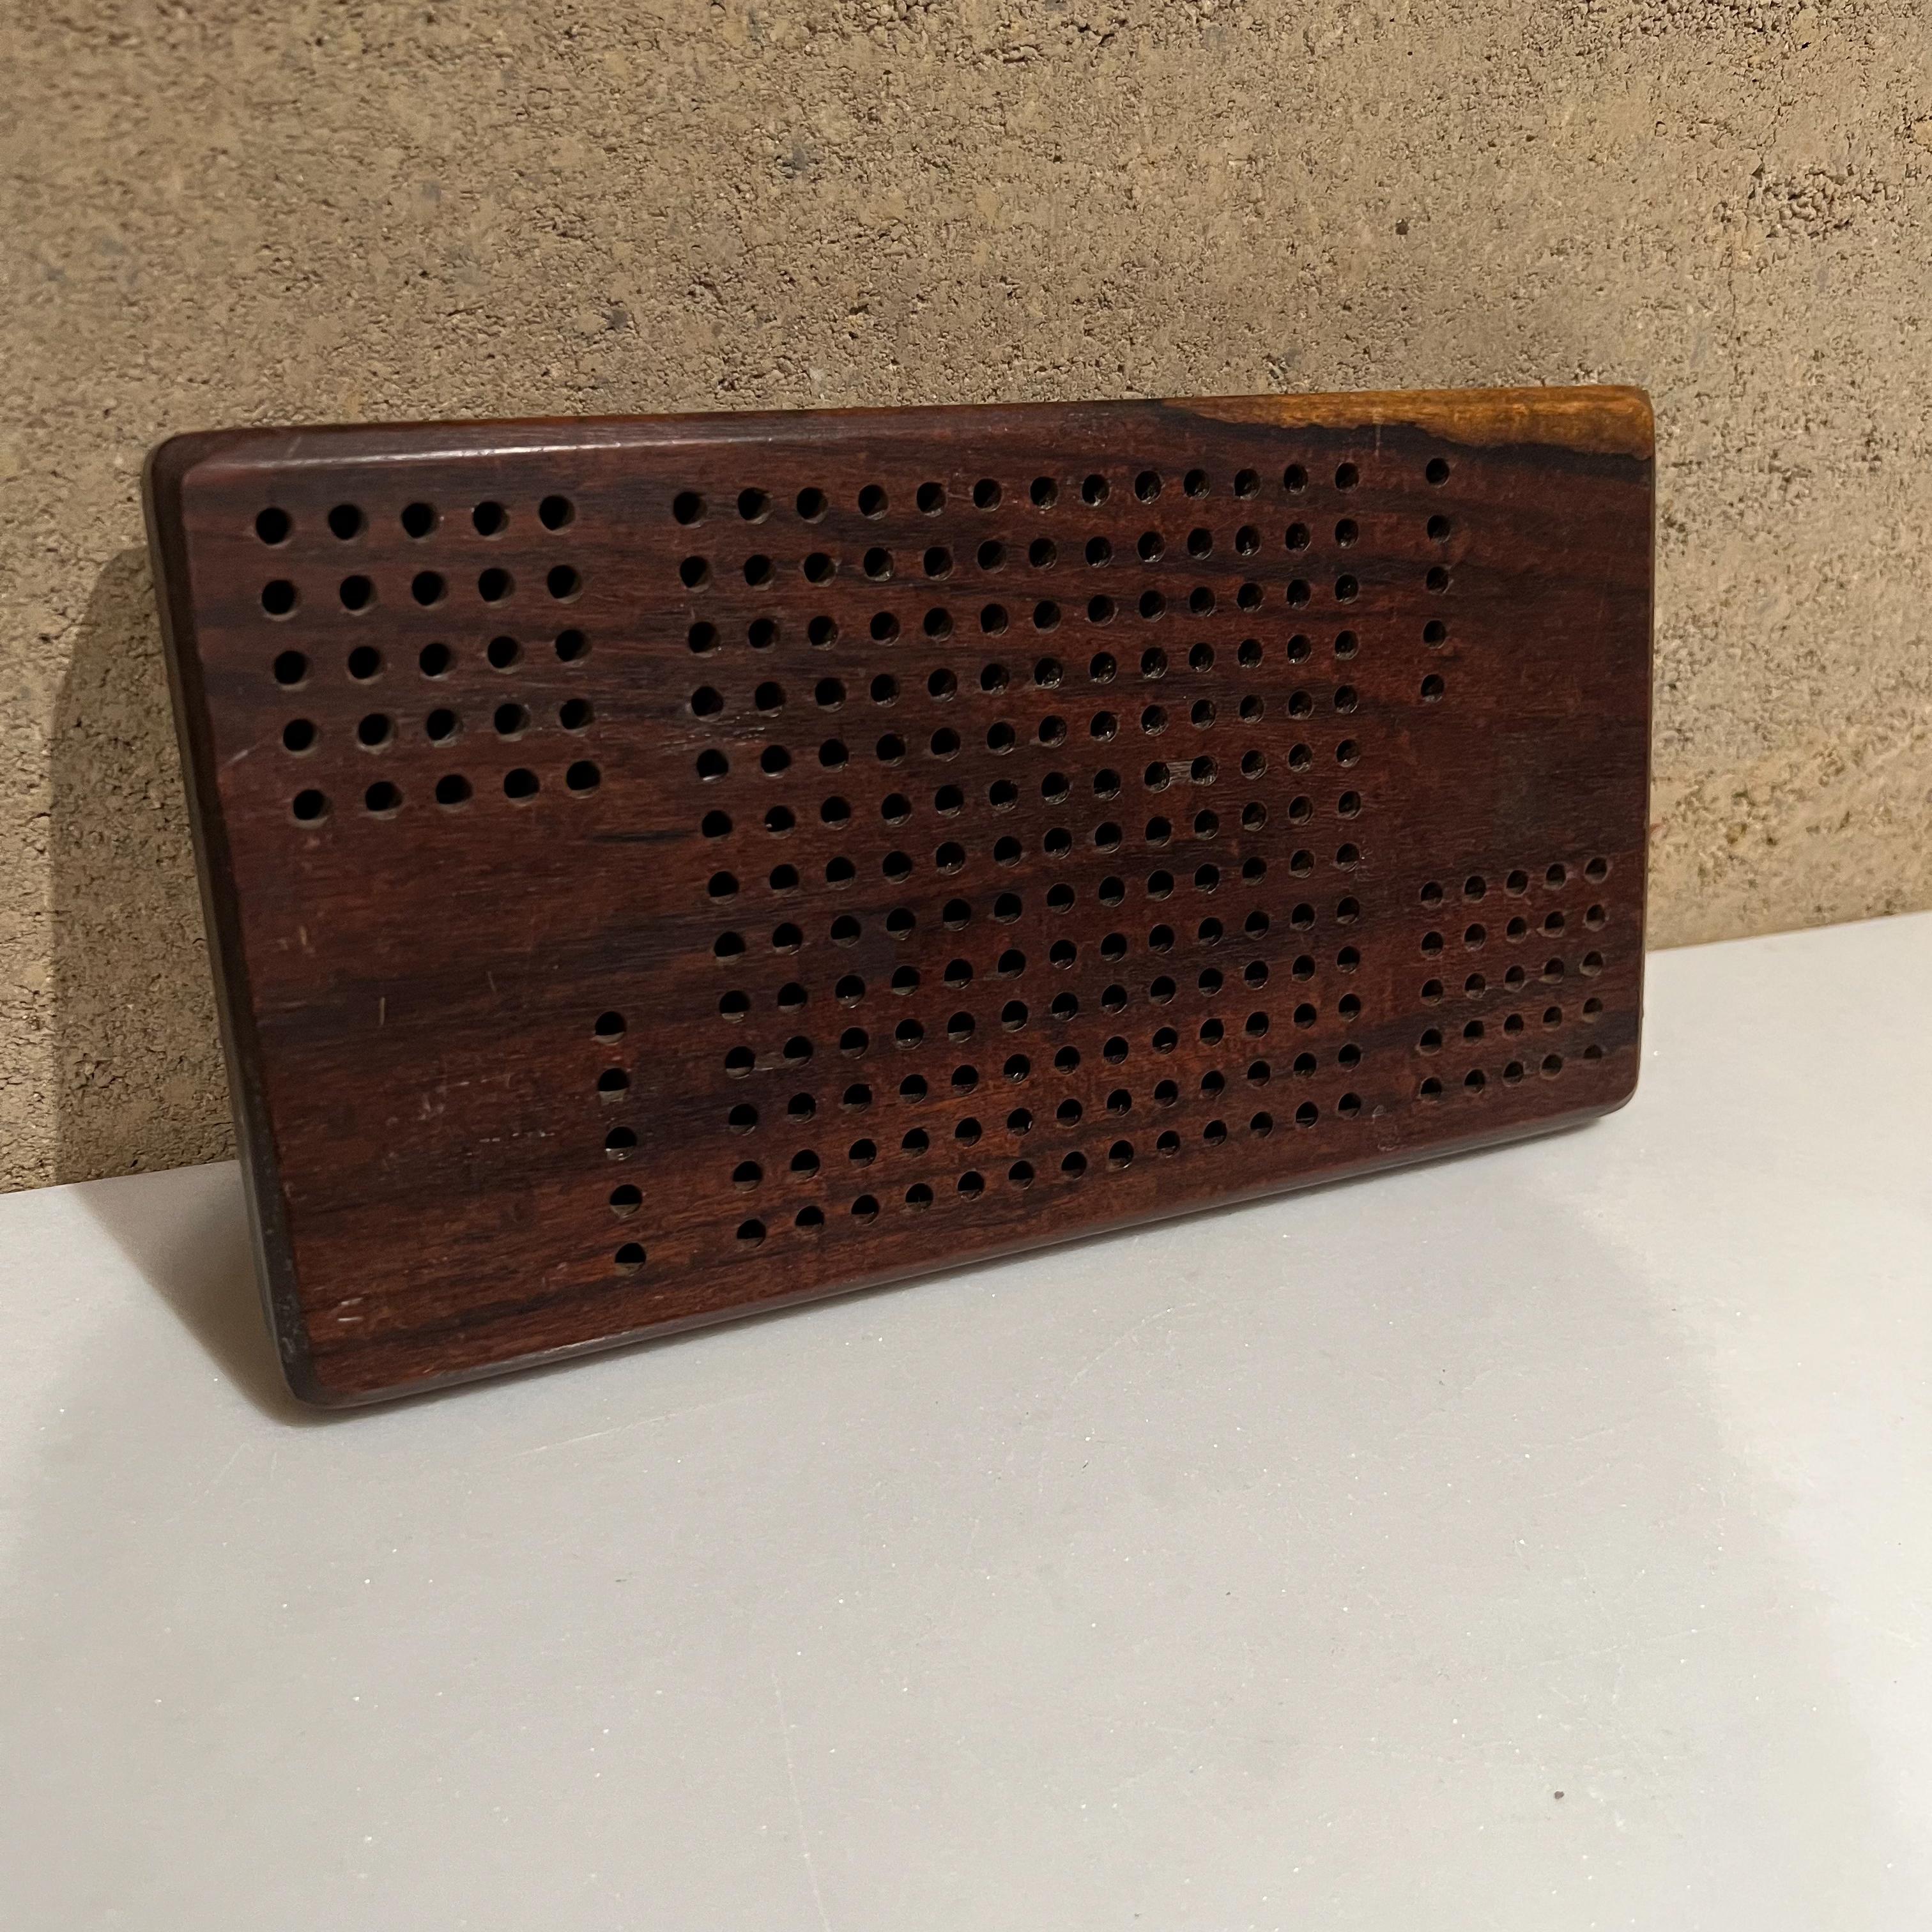 AMBIANIC presents
1960s Mid-Century Modern vintage rosewood cribbage game board 
For decorative purposes, we are selling the board only.
Measures: 10.25 Wide x 6. D x 1 Thick
Preowned original vintage unrestored condition, refer to images